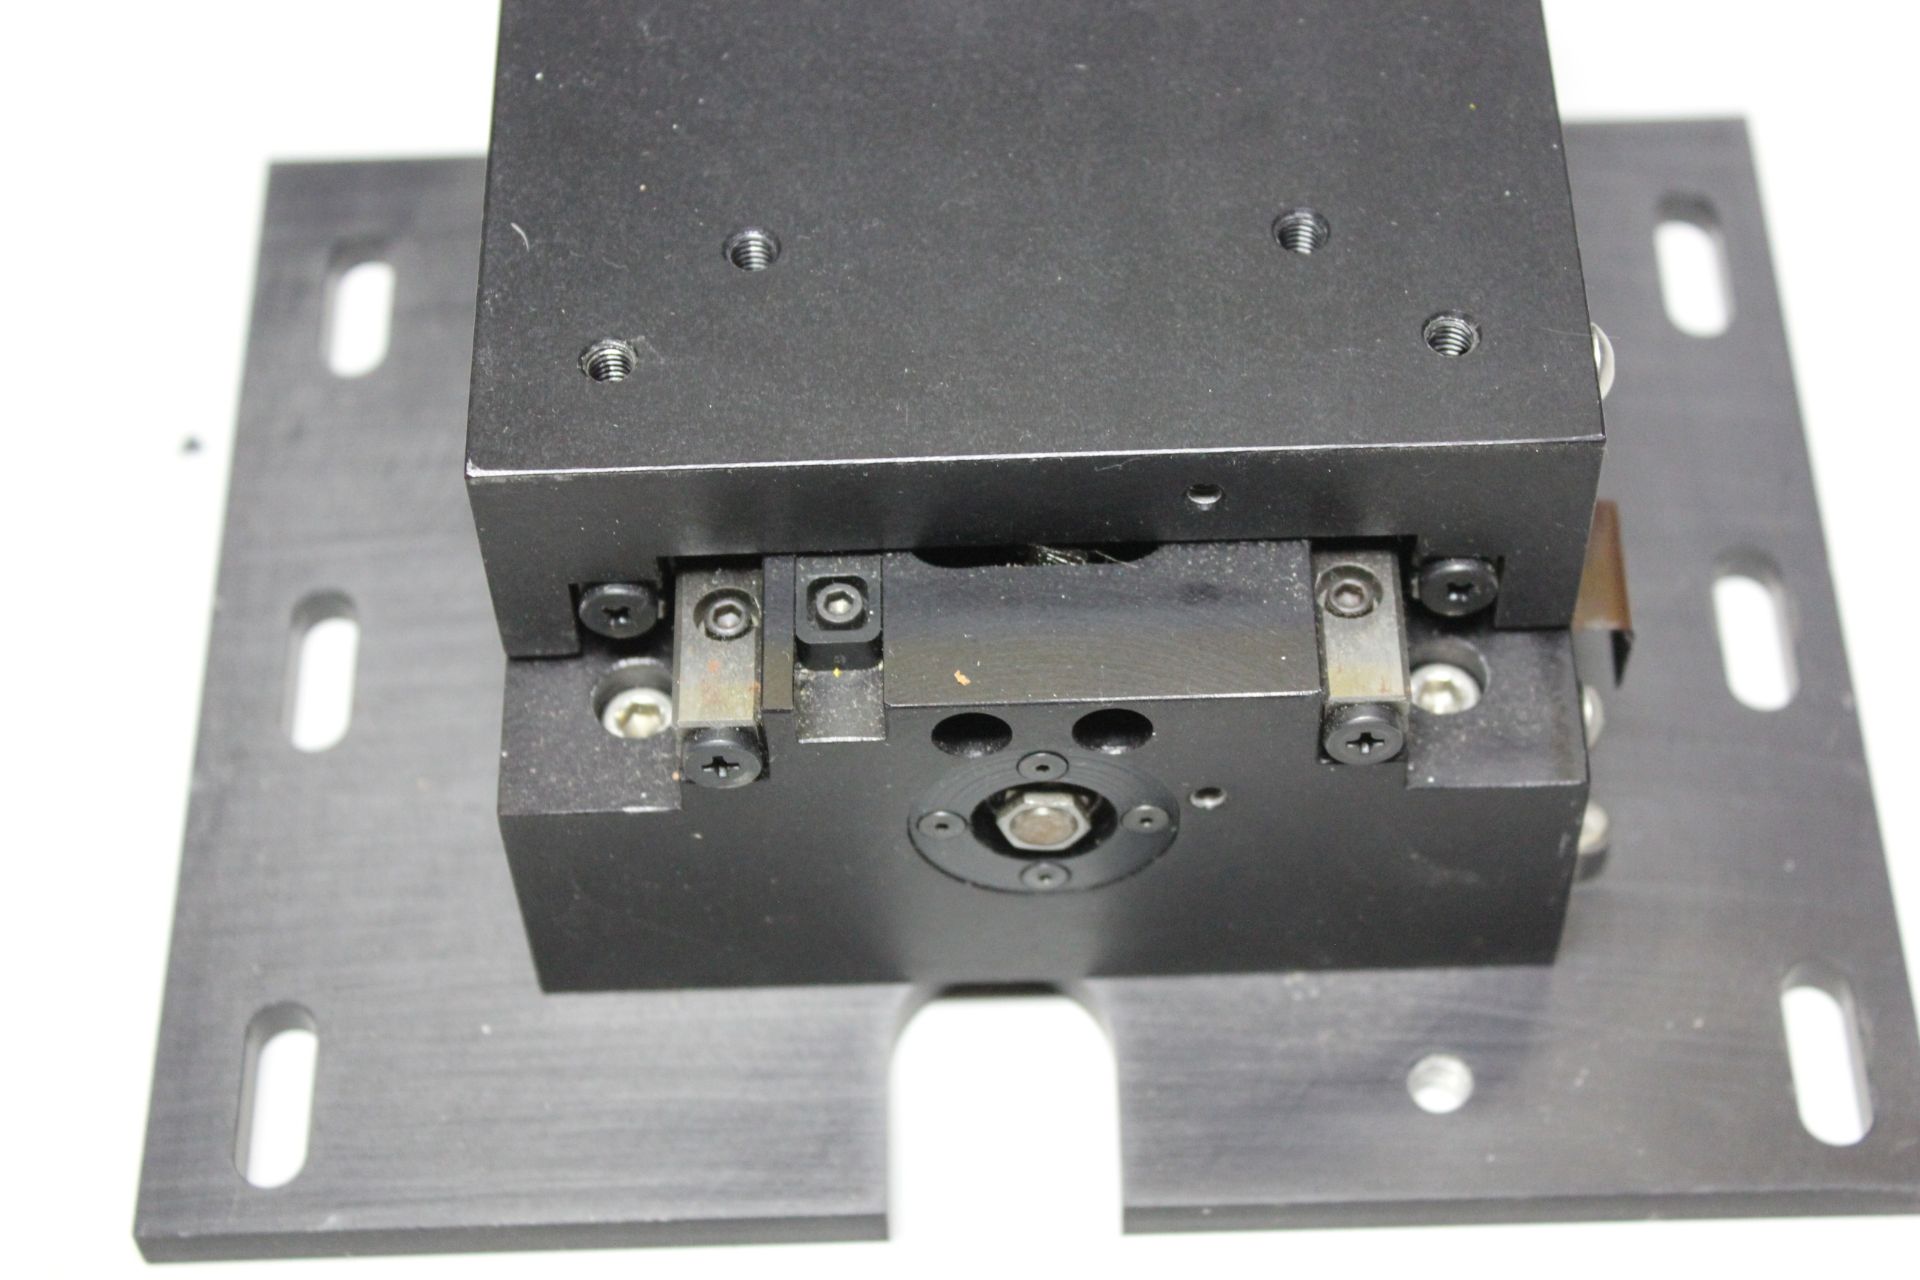 NEAT LINEAR STAGE WITH ELCOM BRUSHLESS SERVO MOTOR - Image 7 of 8